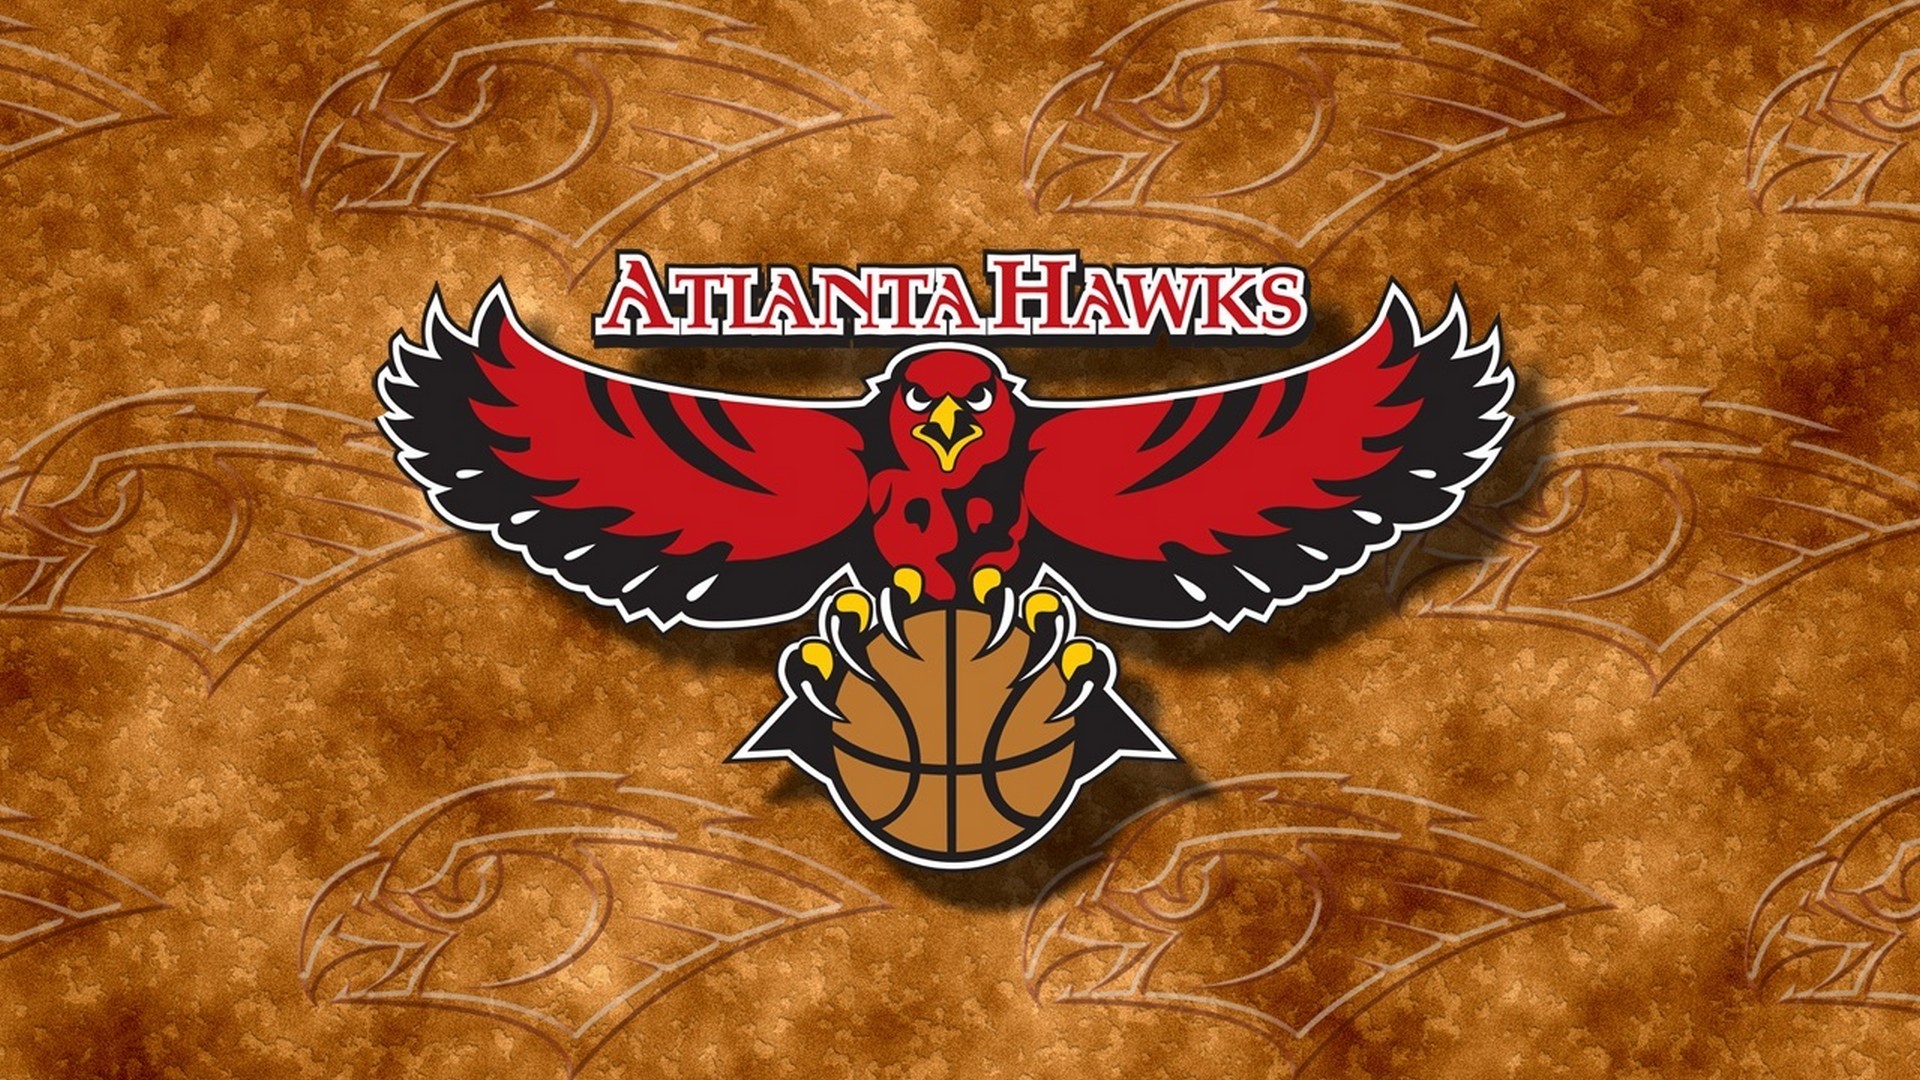 HD Atlanta Hawks Wallpapers with image dimensions 1920x1080 pixel. You can make this wallpaper for your Desktop Computer Backgrounds, Windows or Mac Screensavers, iPhone Lock screen, Tablet or Android and another Mobile Phone device